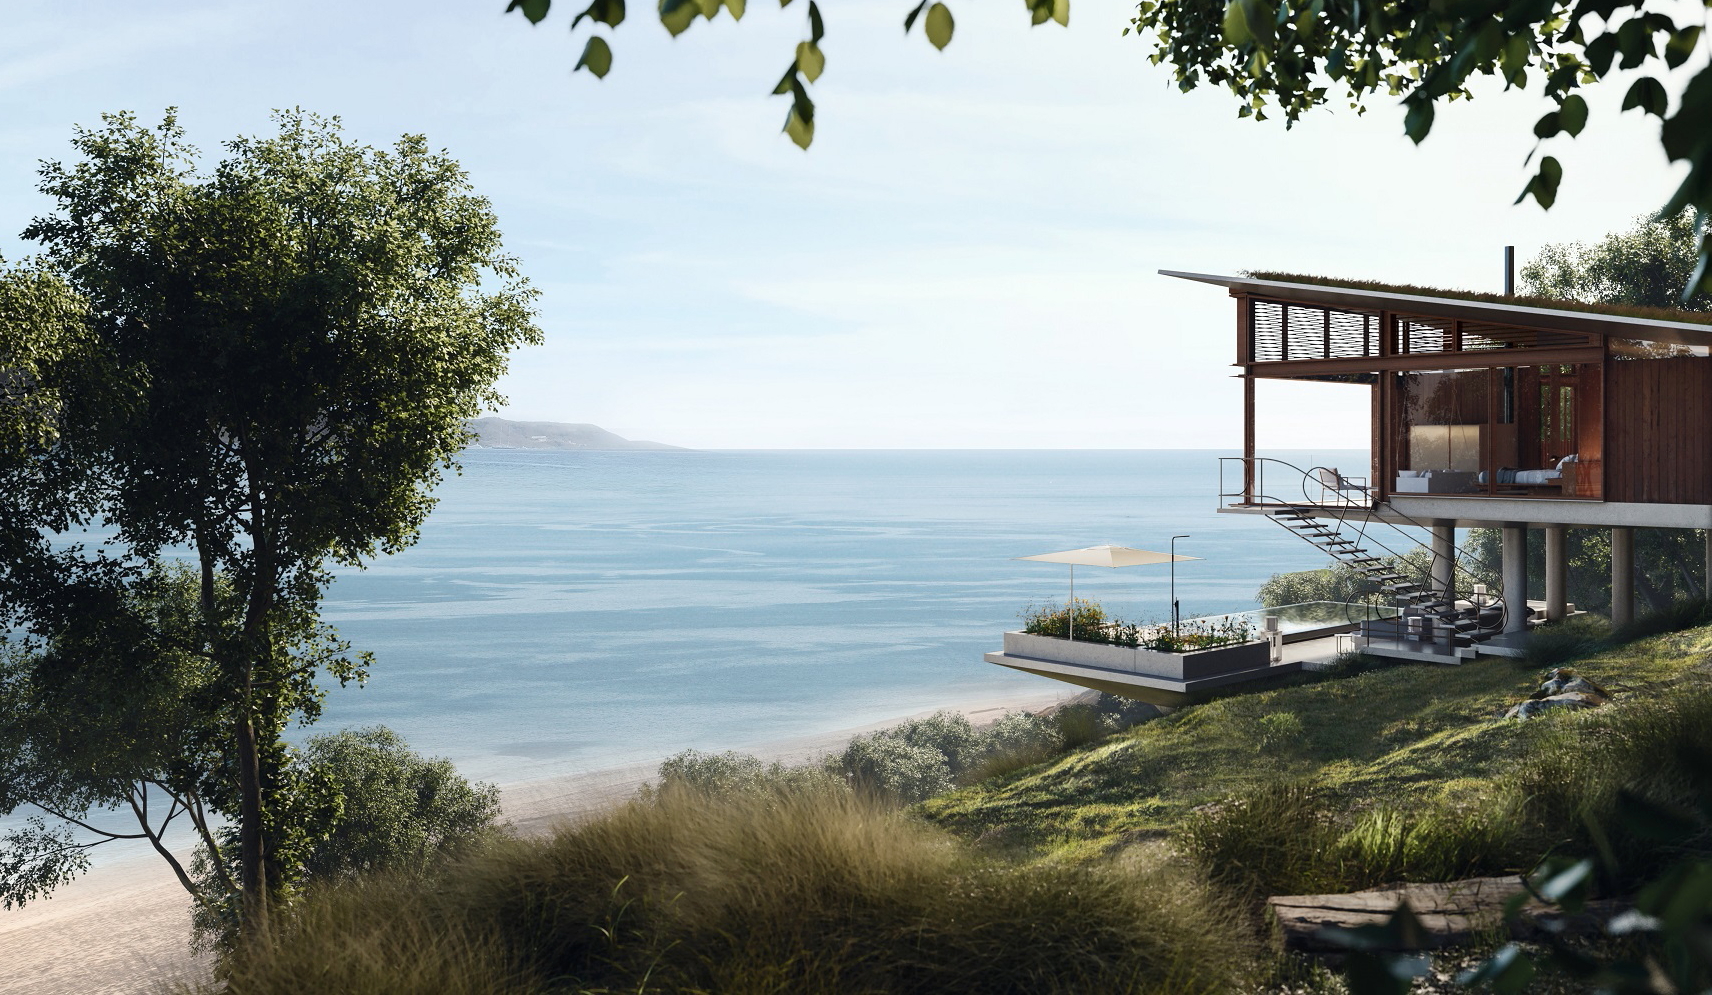 Six Senses has teamed up with The Canyon Group to develop a resort in Papagayo, Costa Rica. The Six Senses Papagayo will be located within the 2,300-acre Papagayo Peninsula on a site that stretches from the highest point, offering 360-degree panorama of the Guanacaste archipelago, to a forested beachfront dotted with 41 secluded pool villas. Click to enlarge.